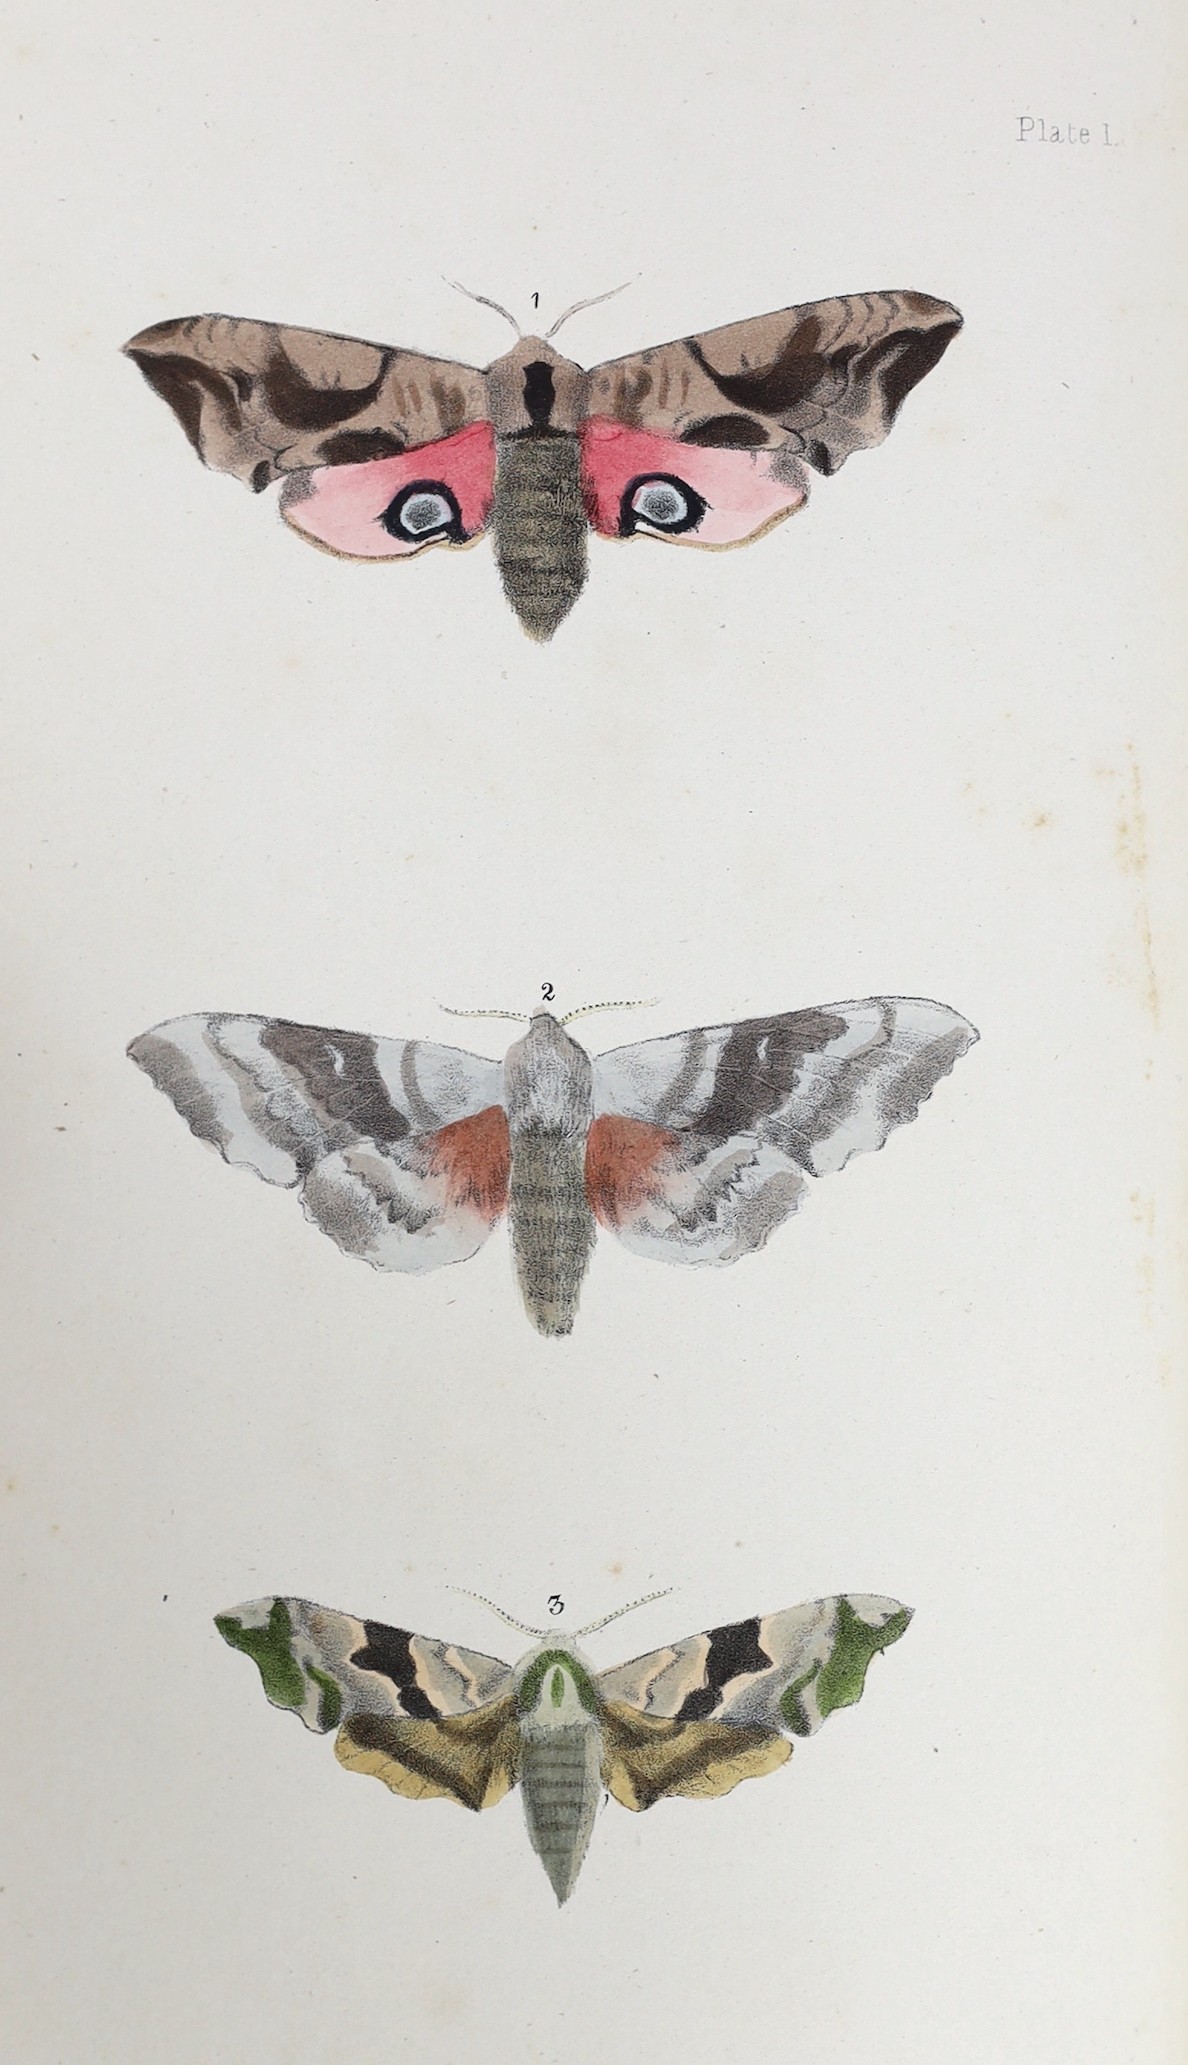 Morris, Rev. Francis Orpen - A Natural History of British Moths...4 vols. 132 hand coloured plates; contemp. half morocco and marbled boards, gilt decorated panelled spines, ge. and marbled e/ps., roy. 8vo. 1872